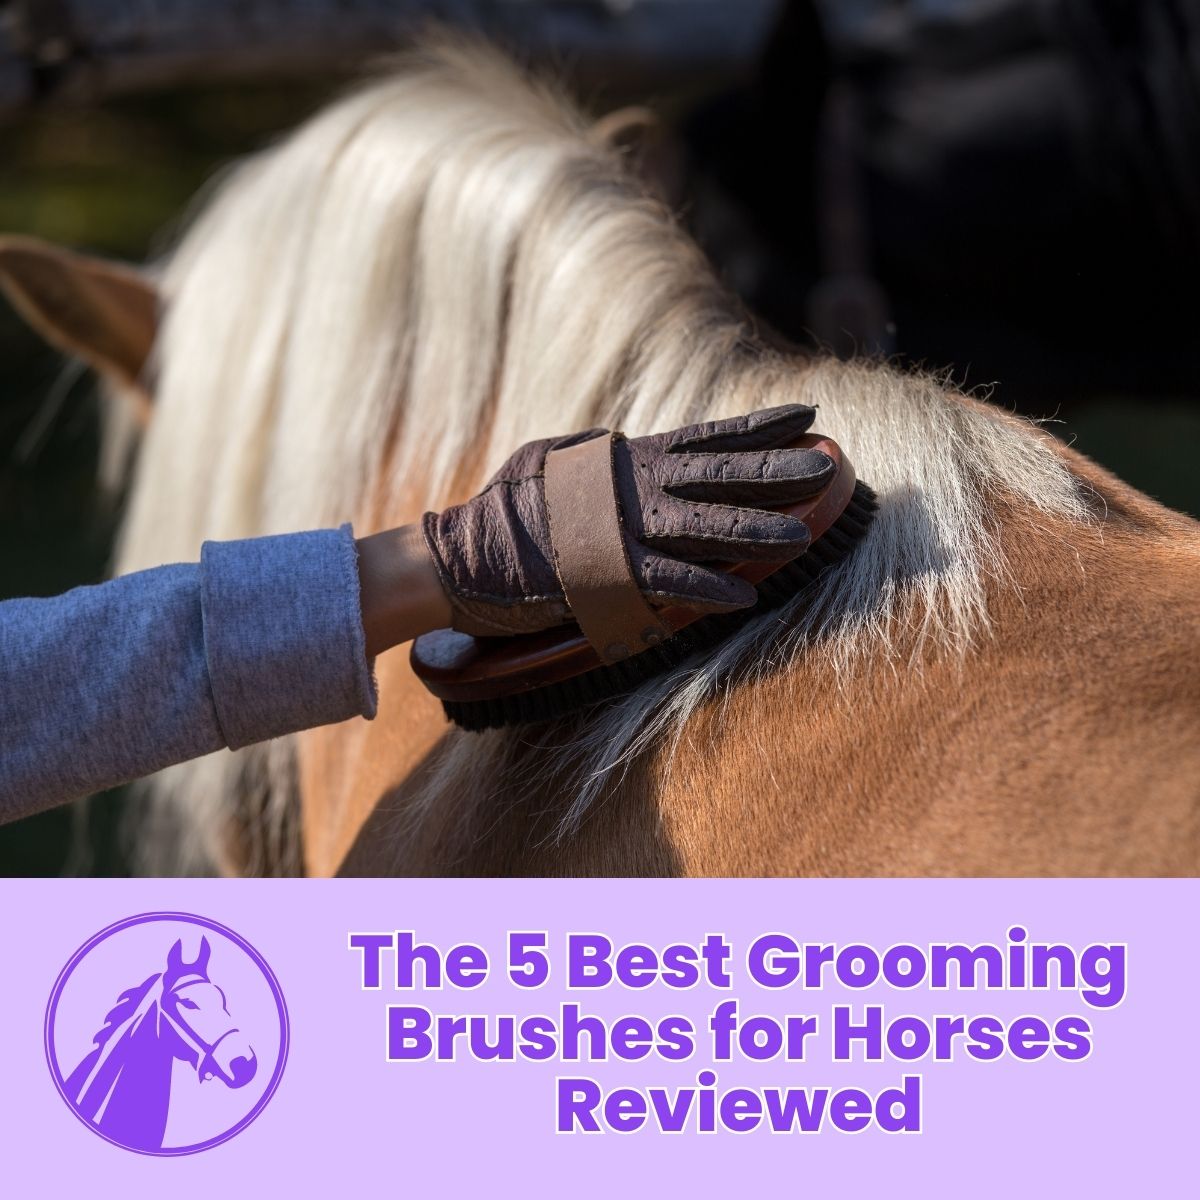 You are currently viewing The 5 Best Grooming Brushes for Horses Reviewed